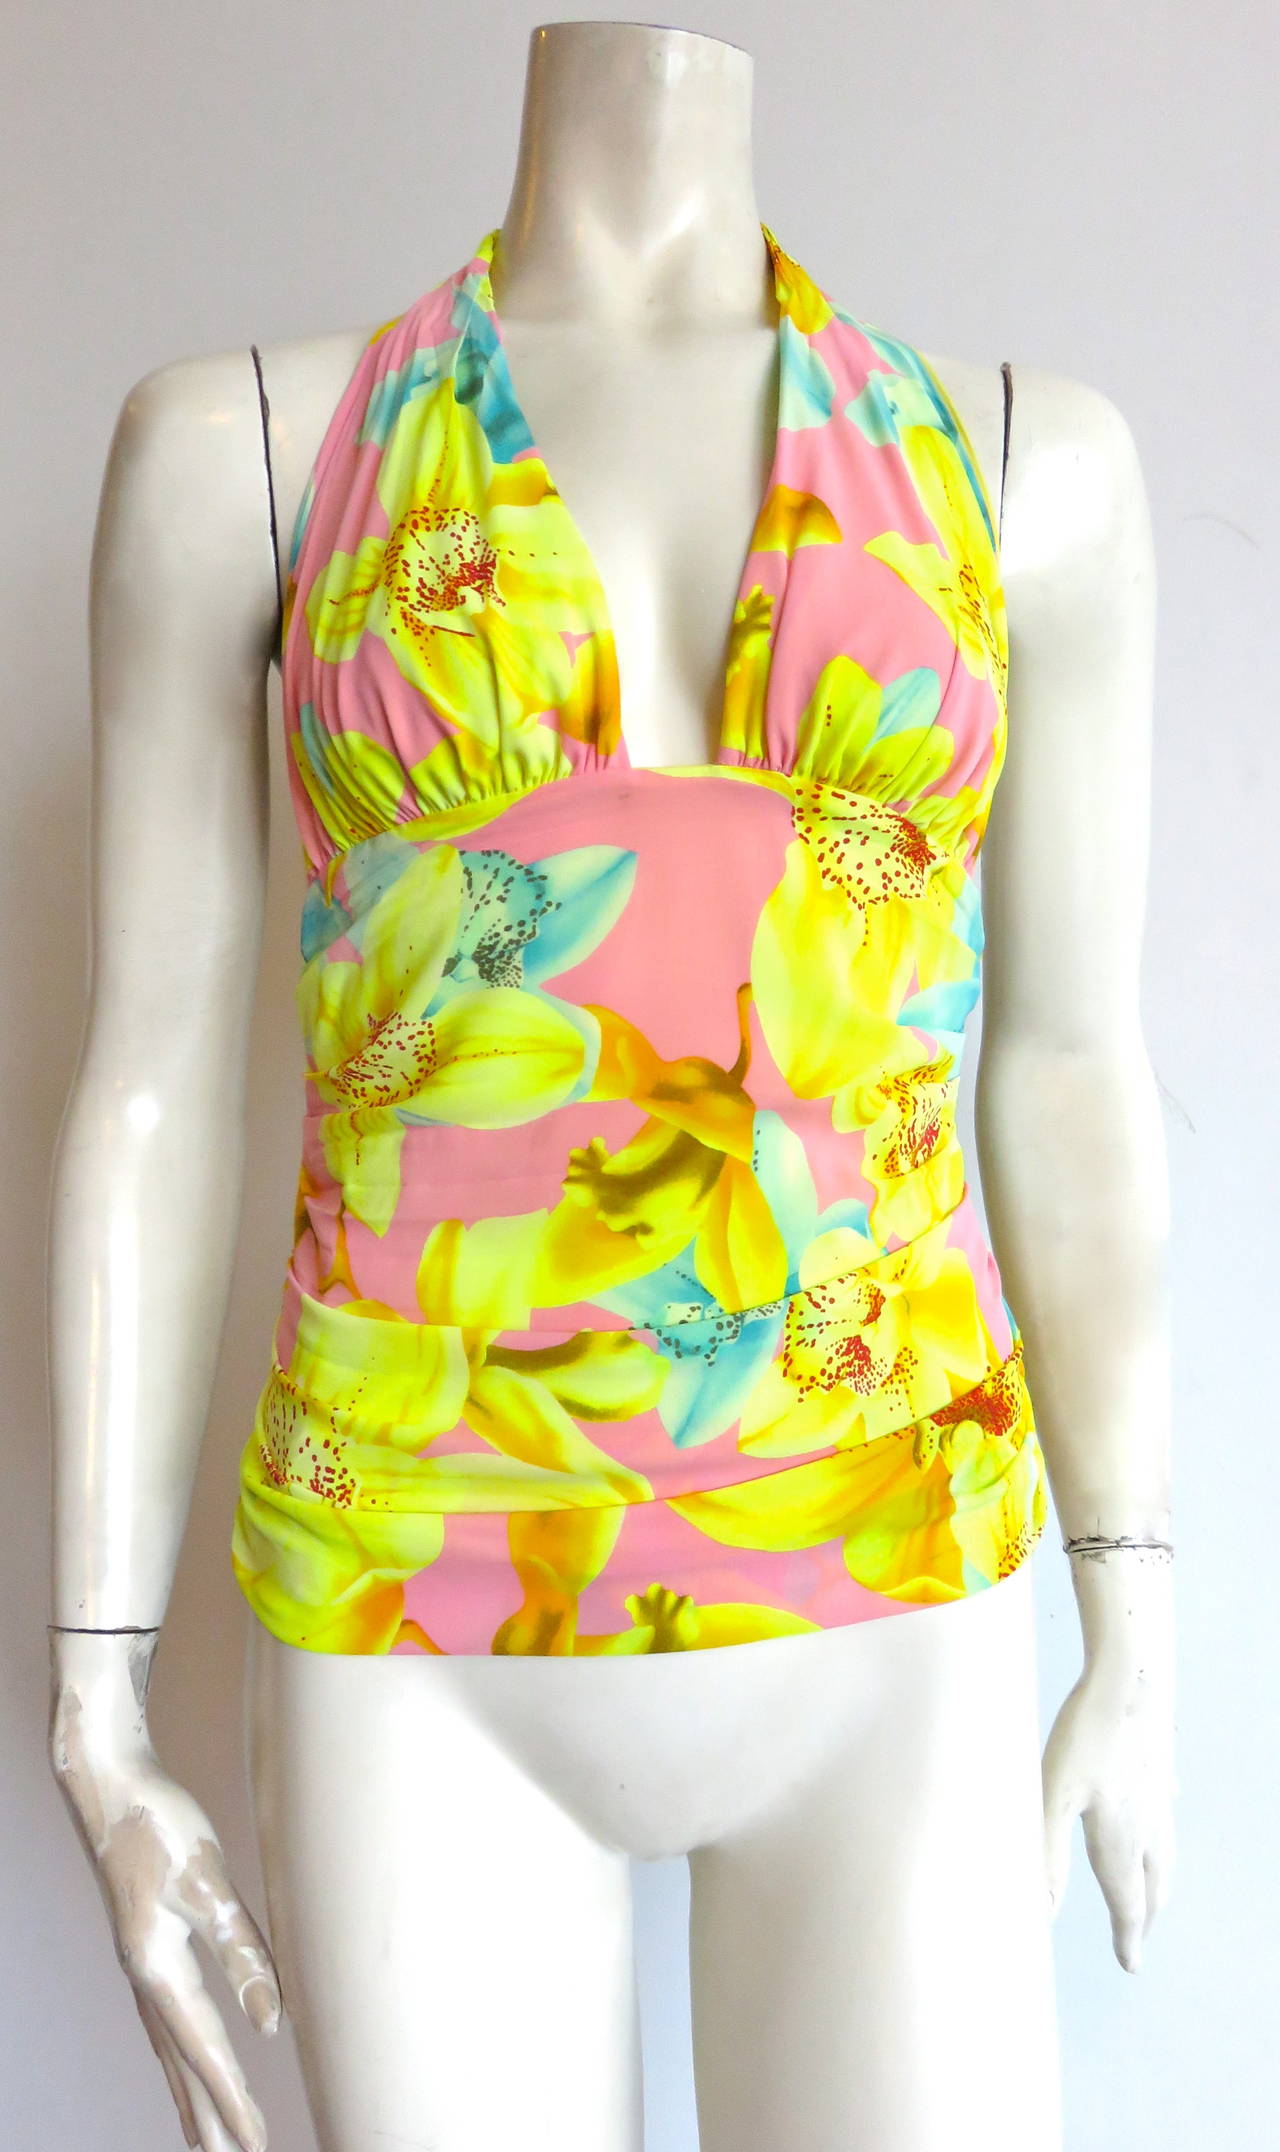 Worn once, excellent condition, VERSACE, tropical orchid, printed silk halter top.

Stretchy silk fabrication with ruche/gathered construction at the sides, and concealed zipper, side seam closure.

Made in Italy, as labeled.

In excellent